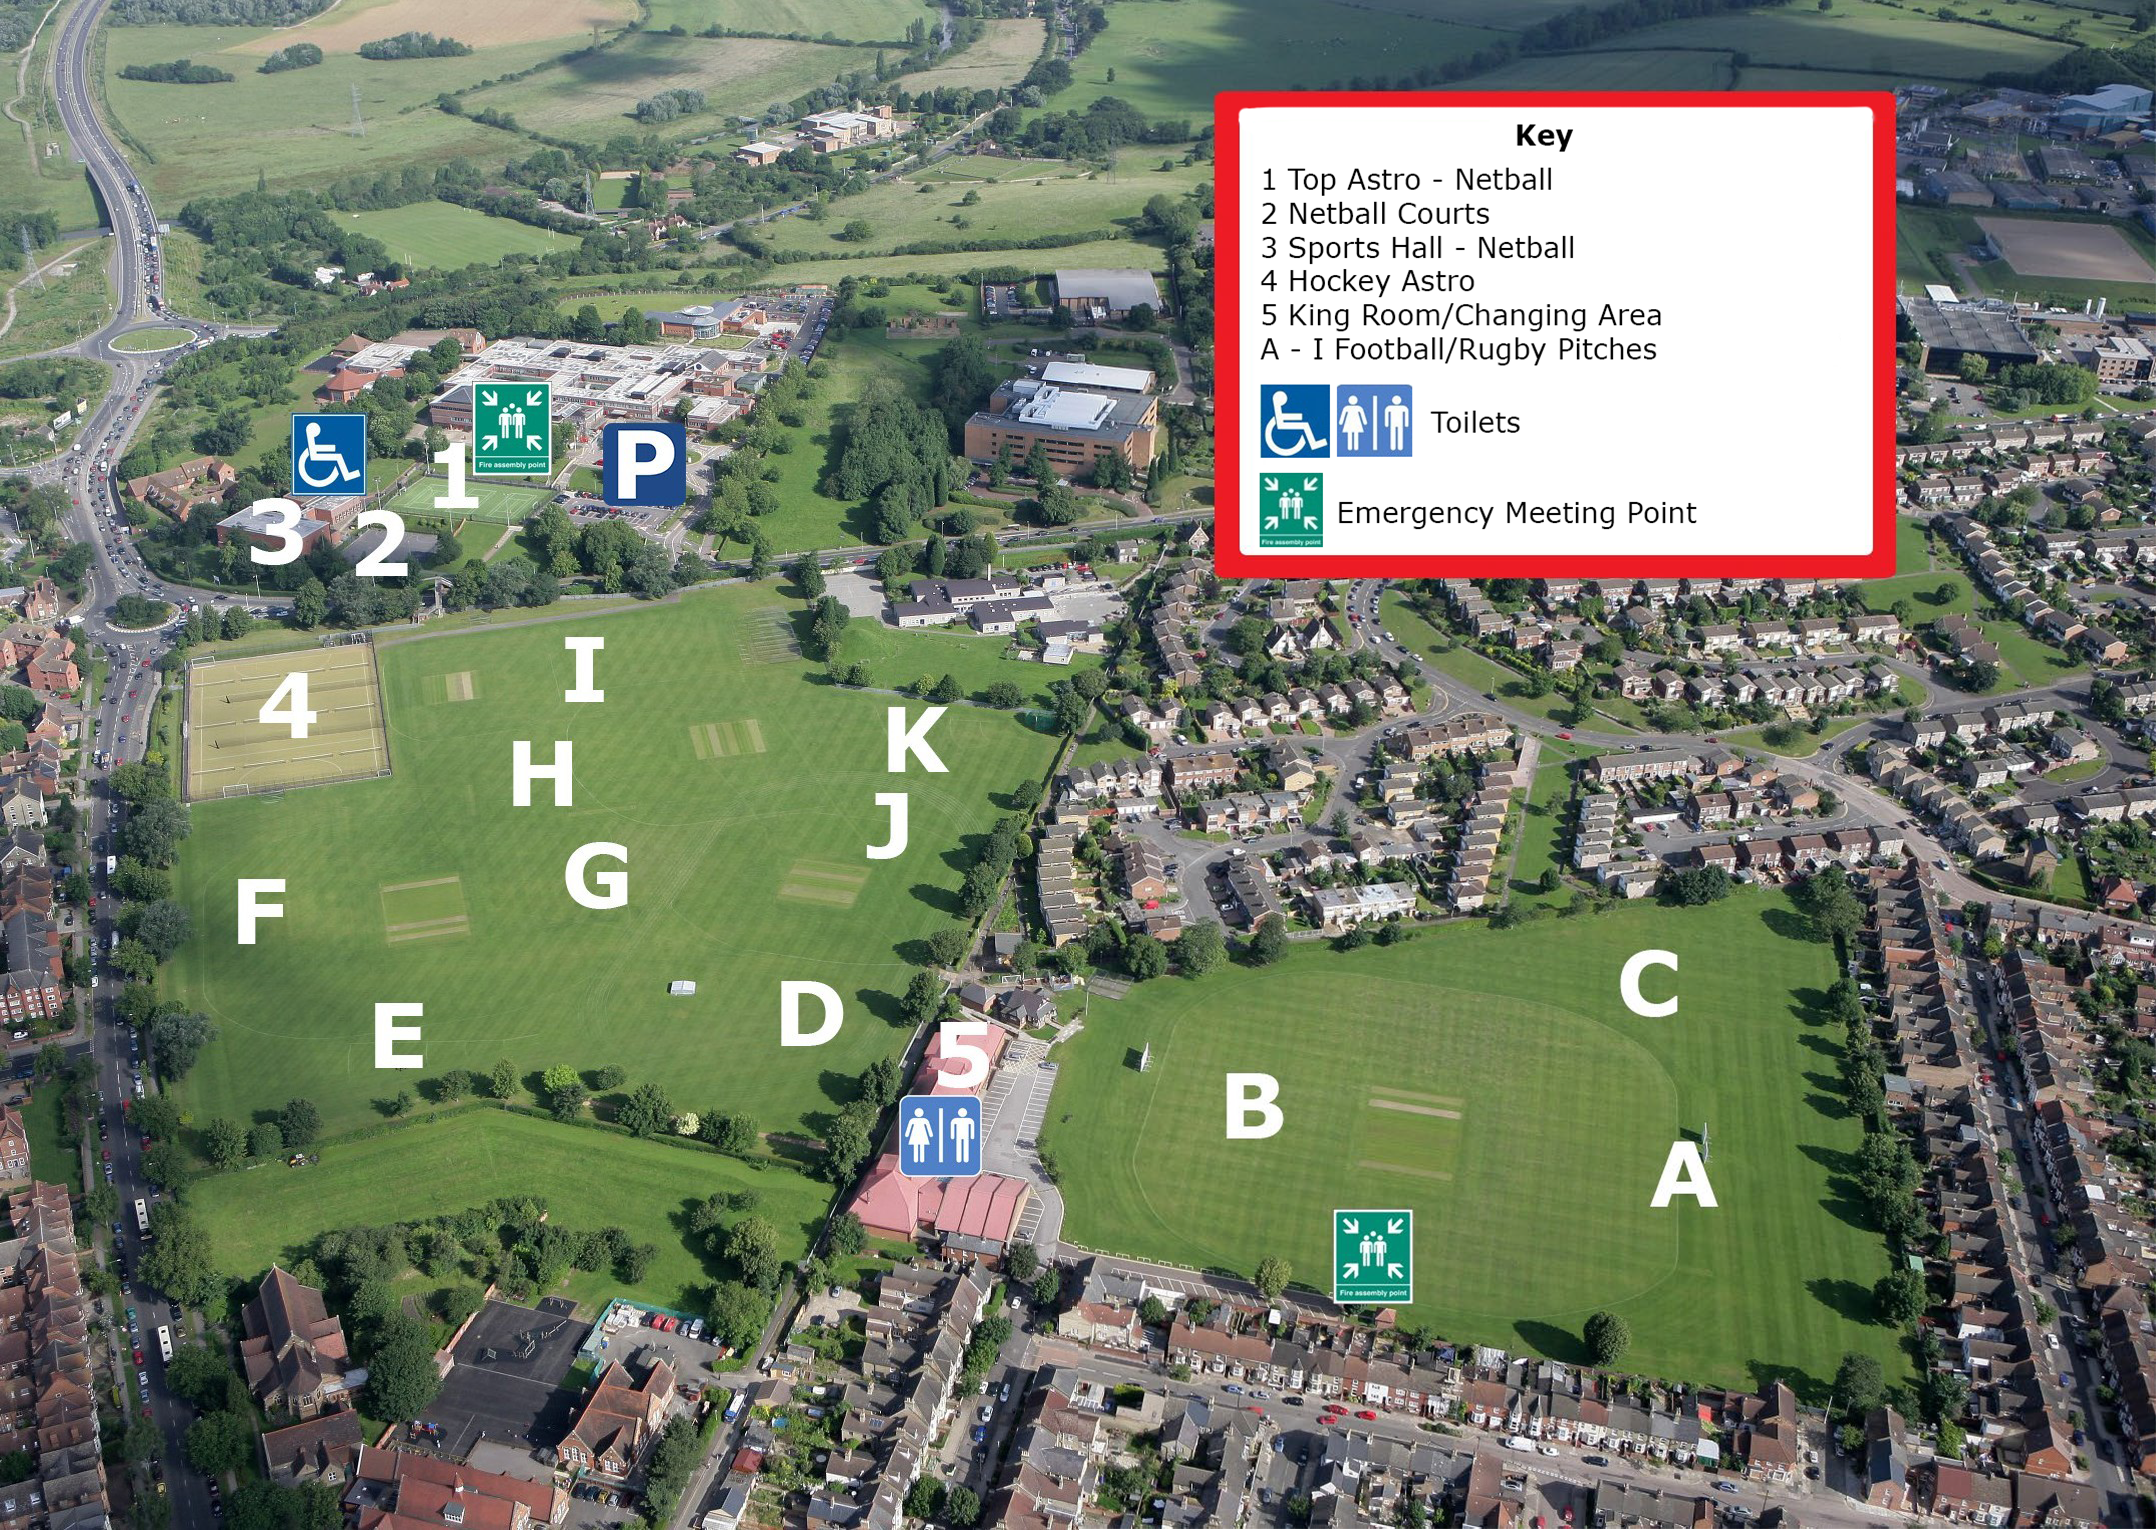 A map of the sports facilities at Bedford Modern School